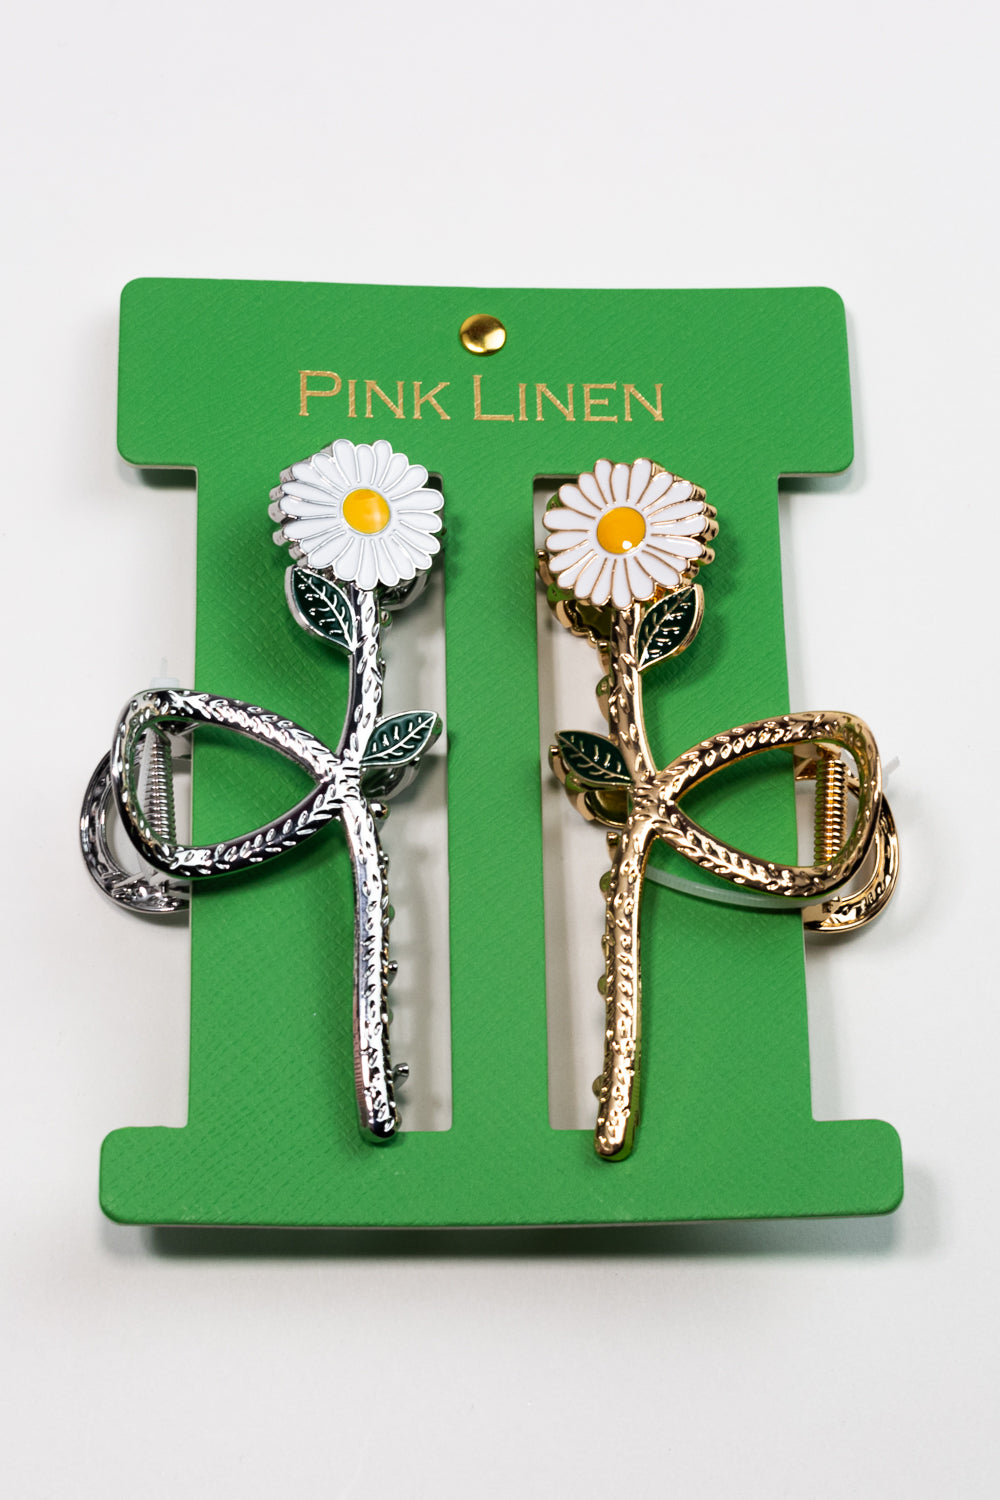 Pink LinenDaisy Metal Claw Clips